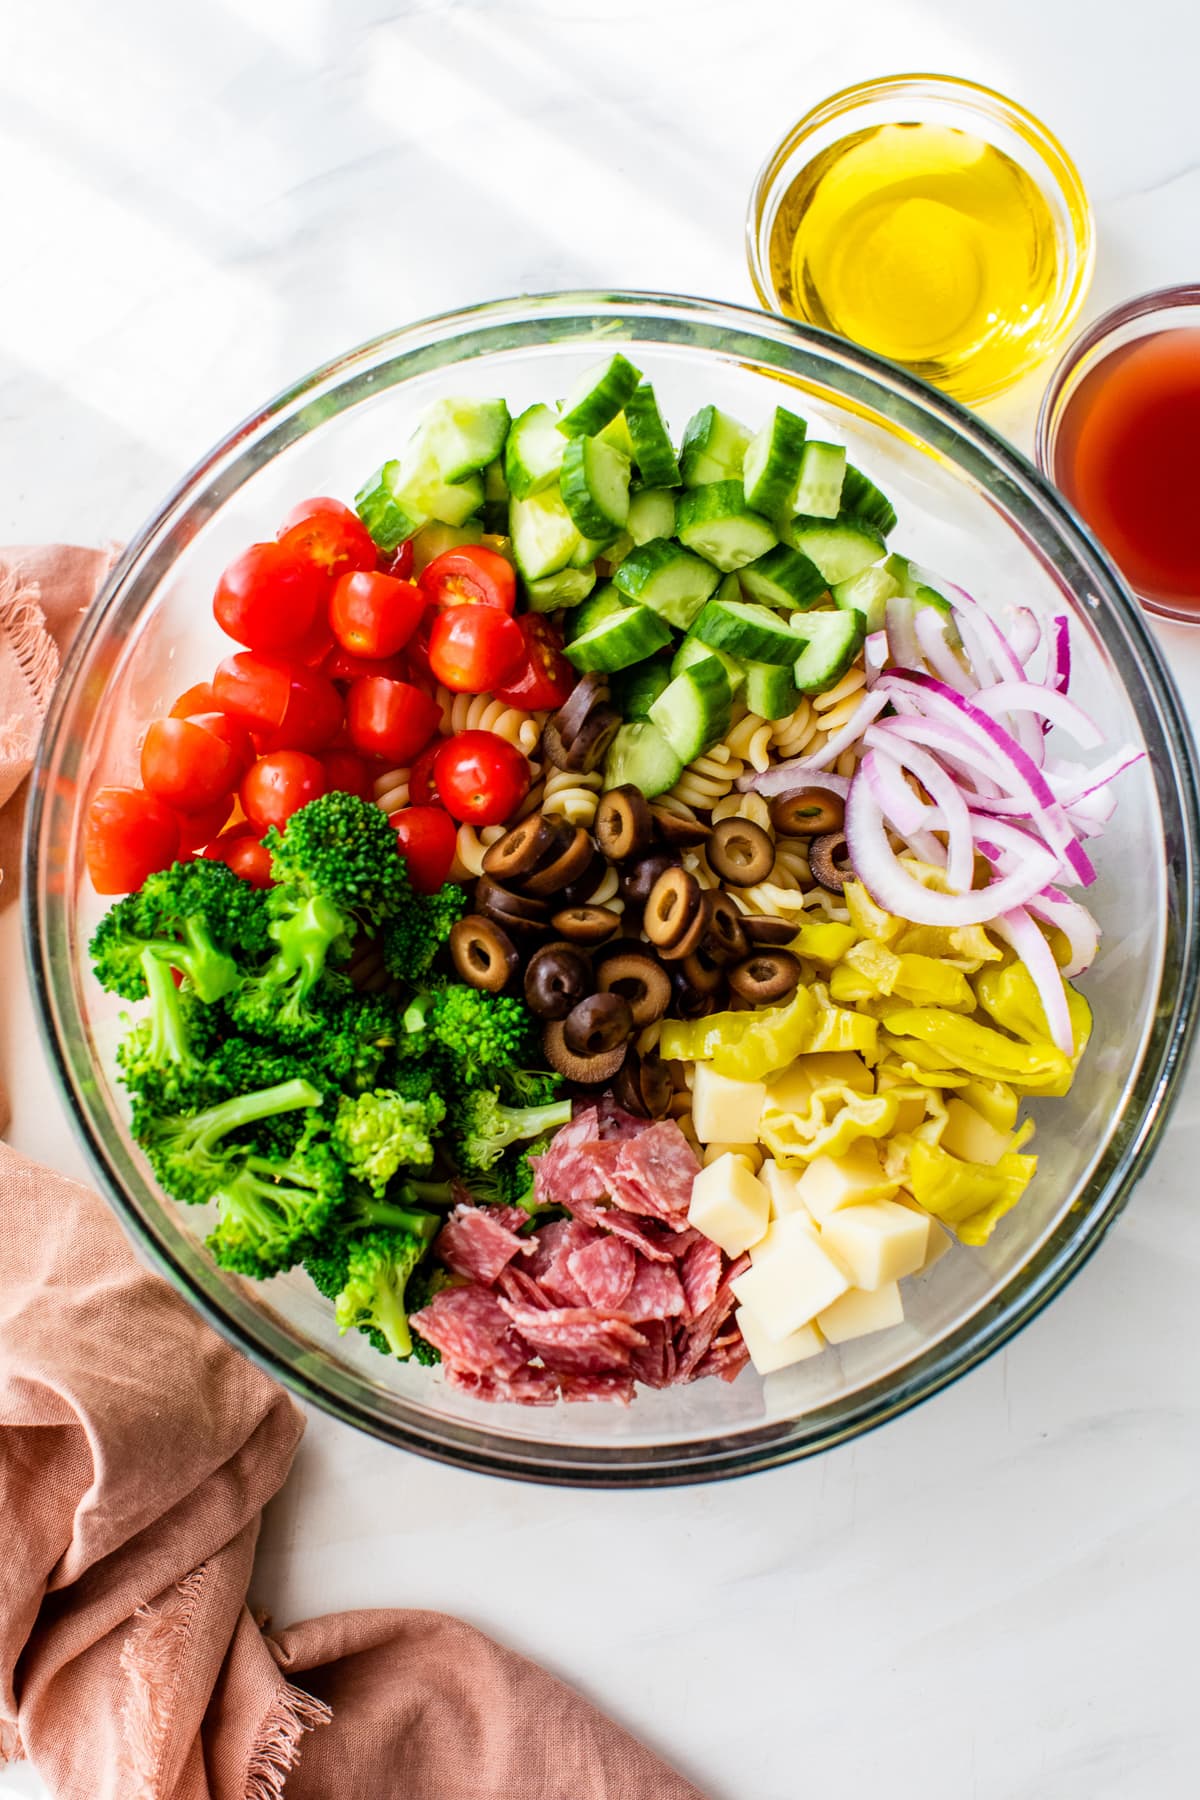 broccoli, tomatoes, and cucumbers, plus Italian favorites, like salami, cheese, pepperoncini, and olives in a bowl.